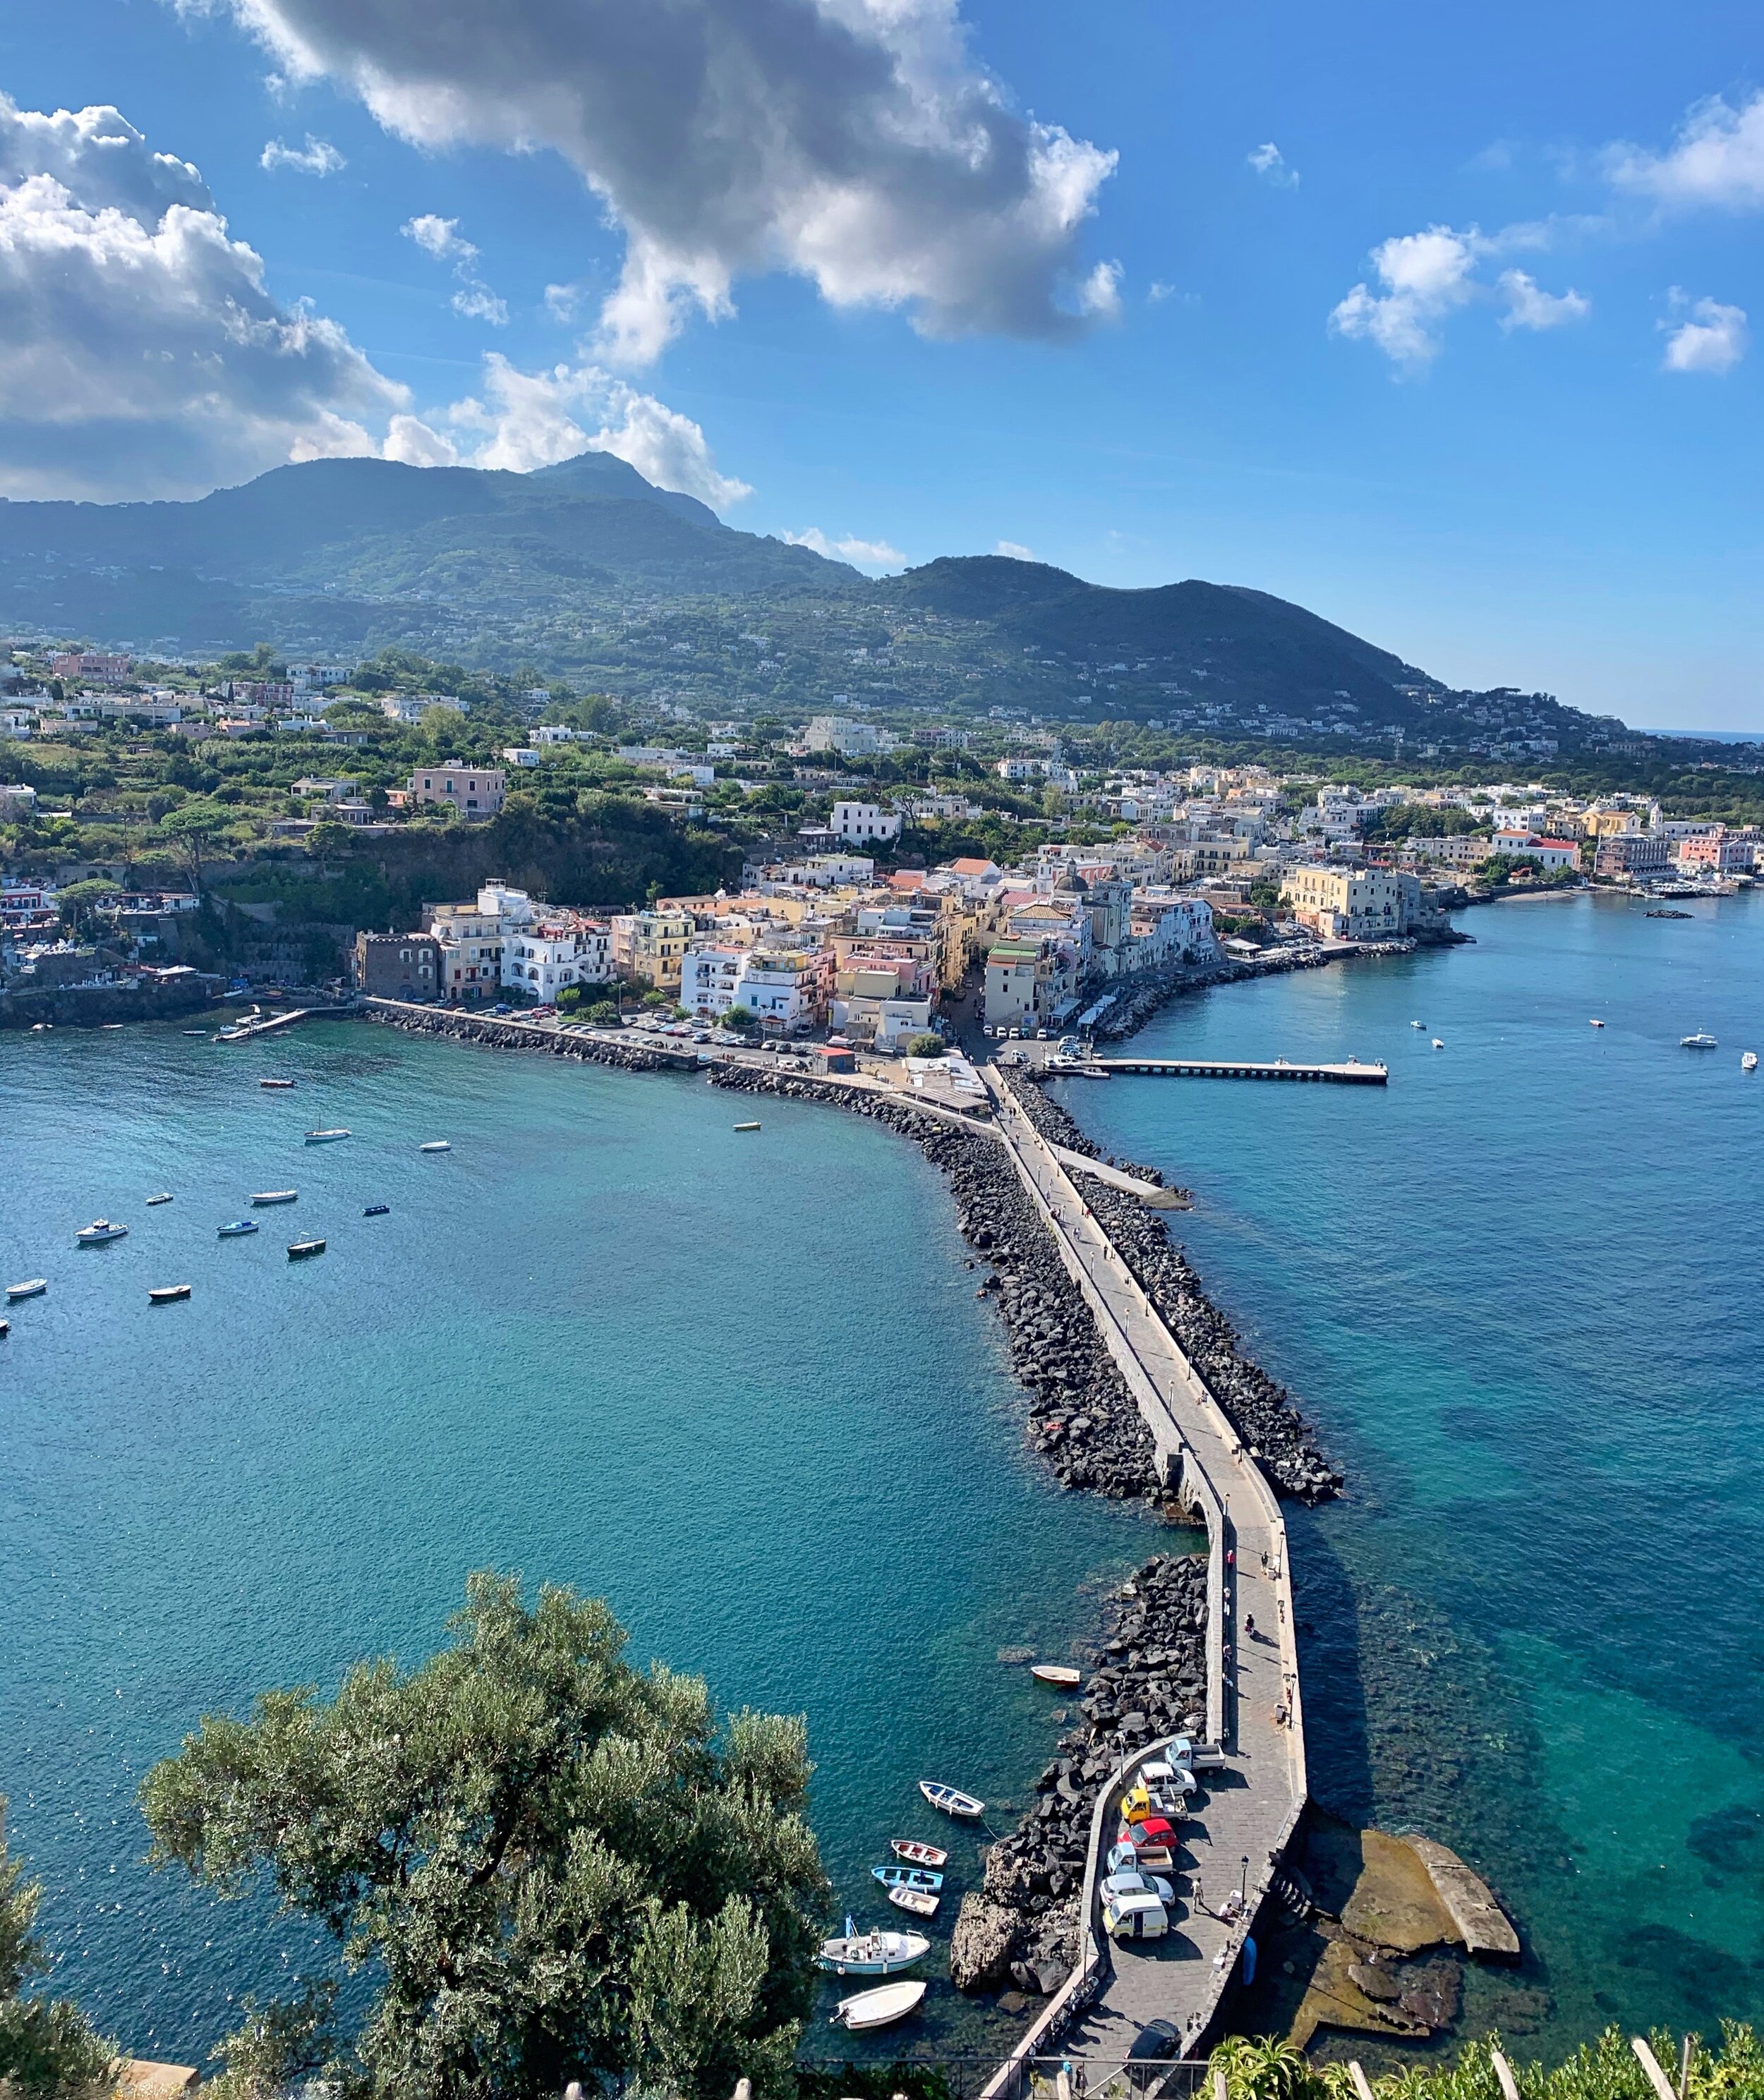 Vibrant turquoise waters seen from the castle | EAT.PRAY.MOVE Yoga Retreats | Ischia, Italy